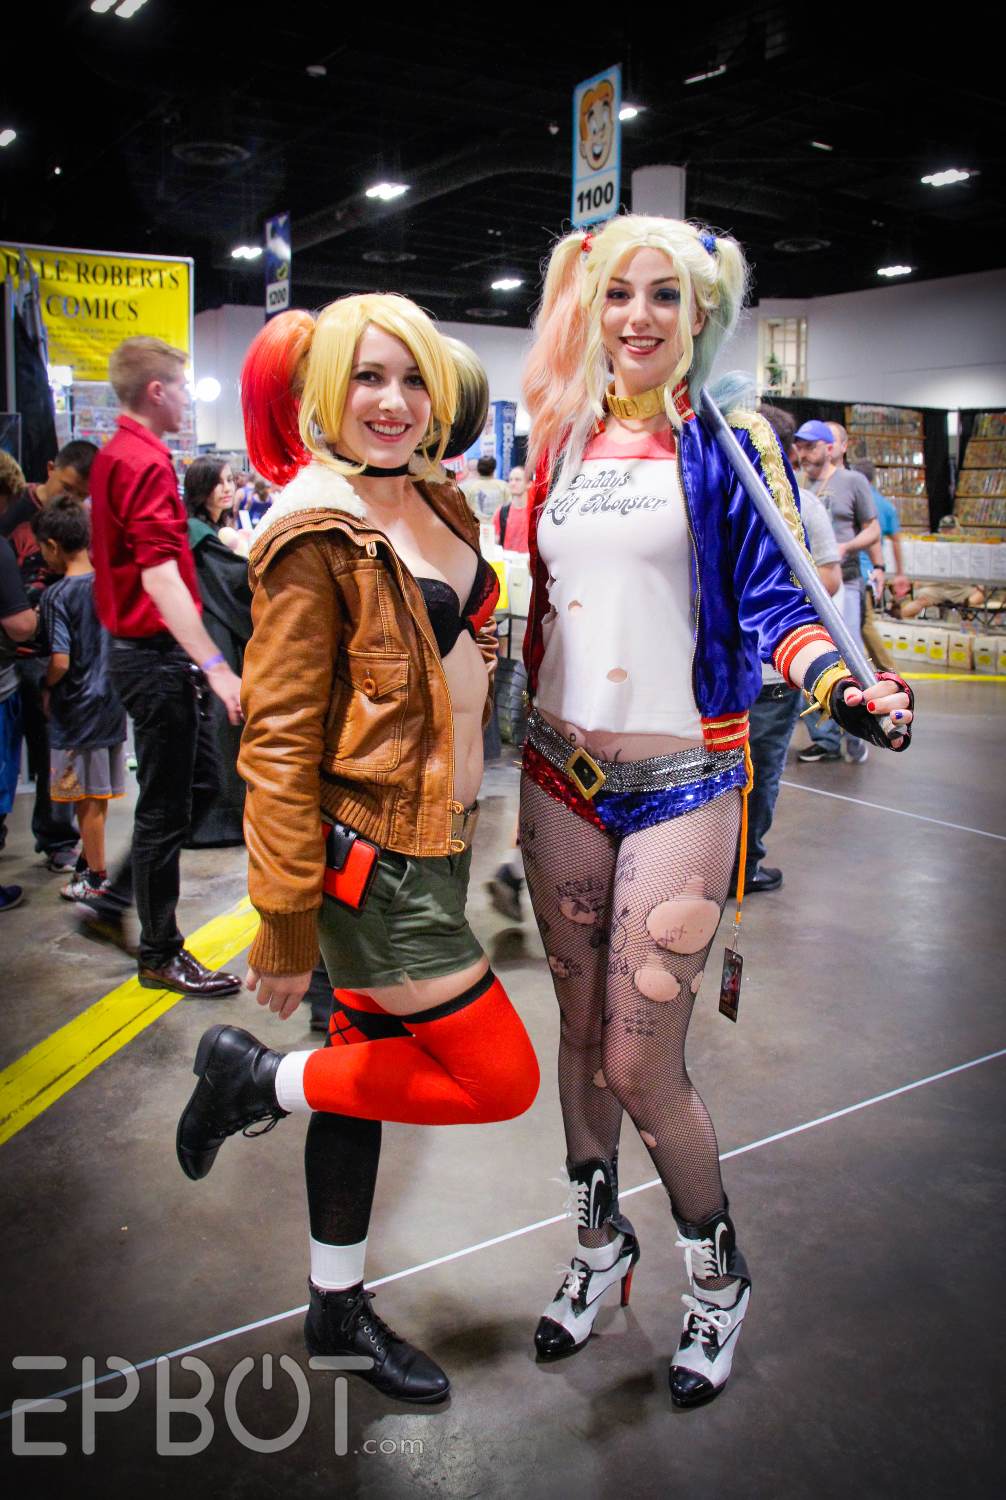 EPBOT: Tampa Bay Comic-Con 2016, The Best Cosplay!